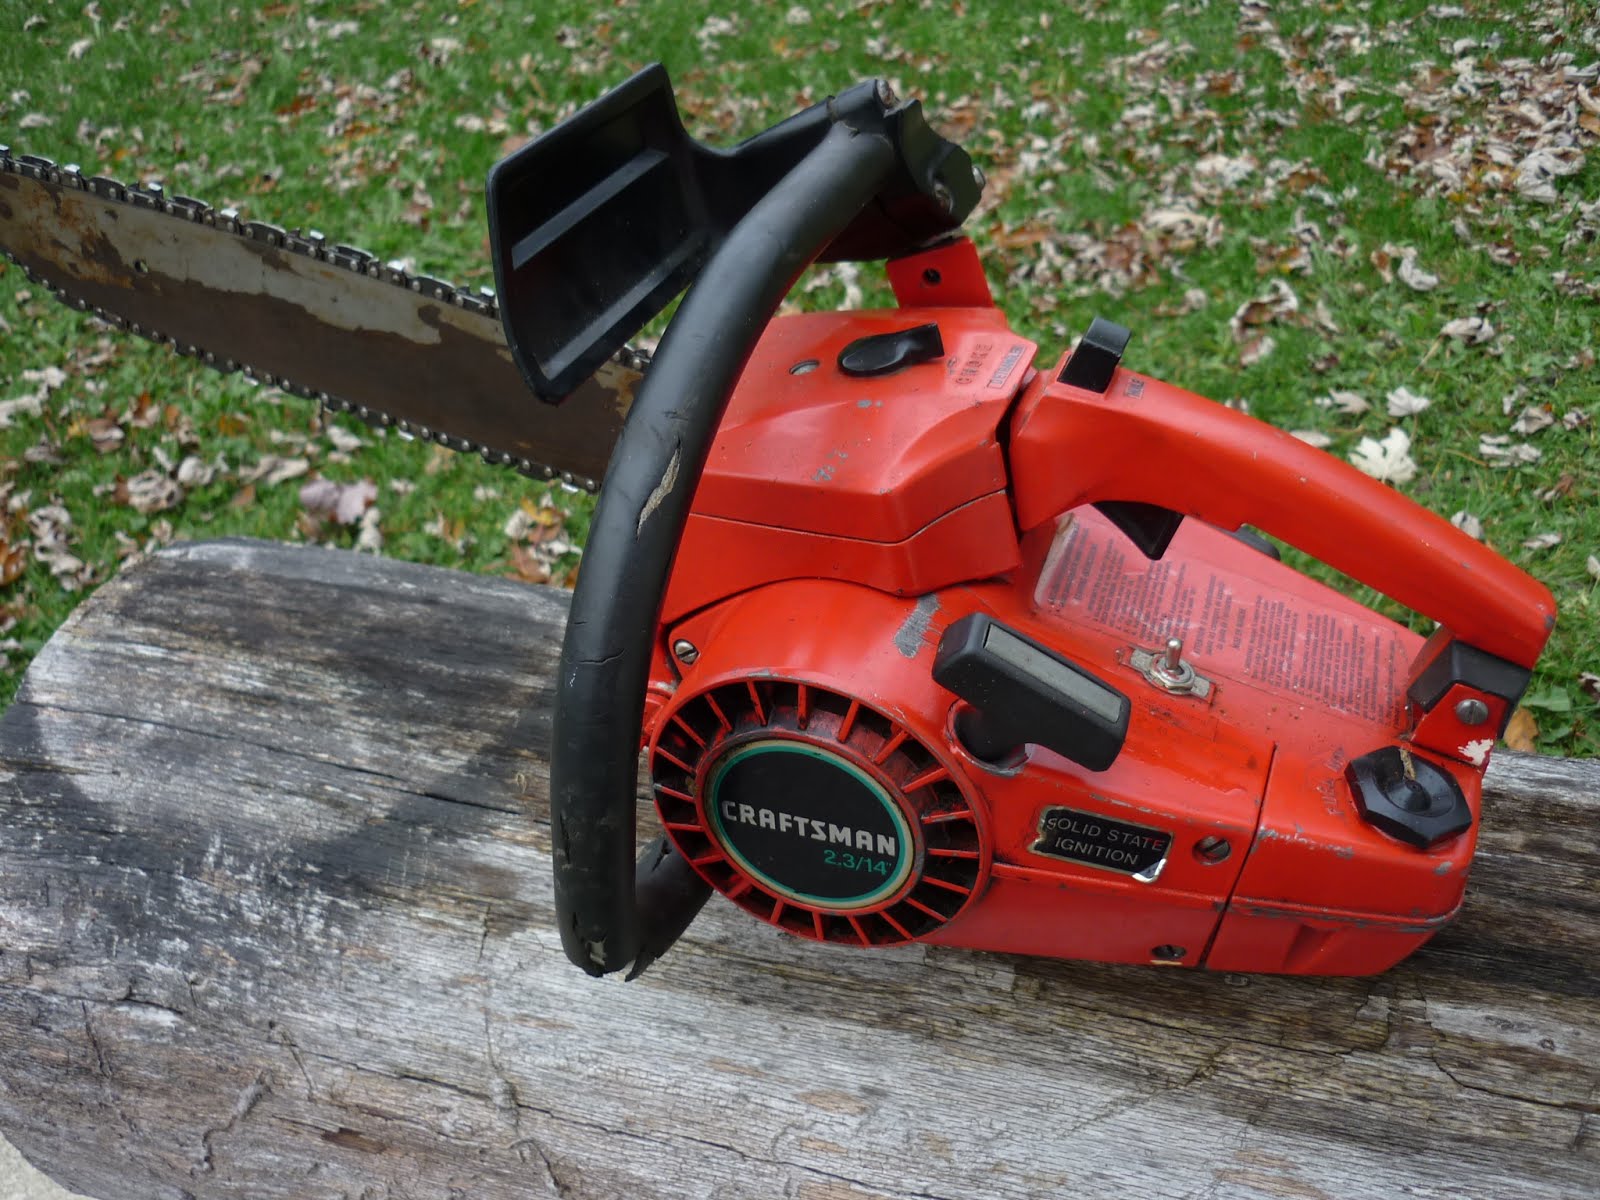 VINTAGE CHAINSAW COLLECTION: CRAFTSMAN-SEARS GROUP OF SAWS.